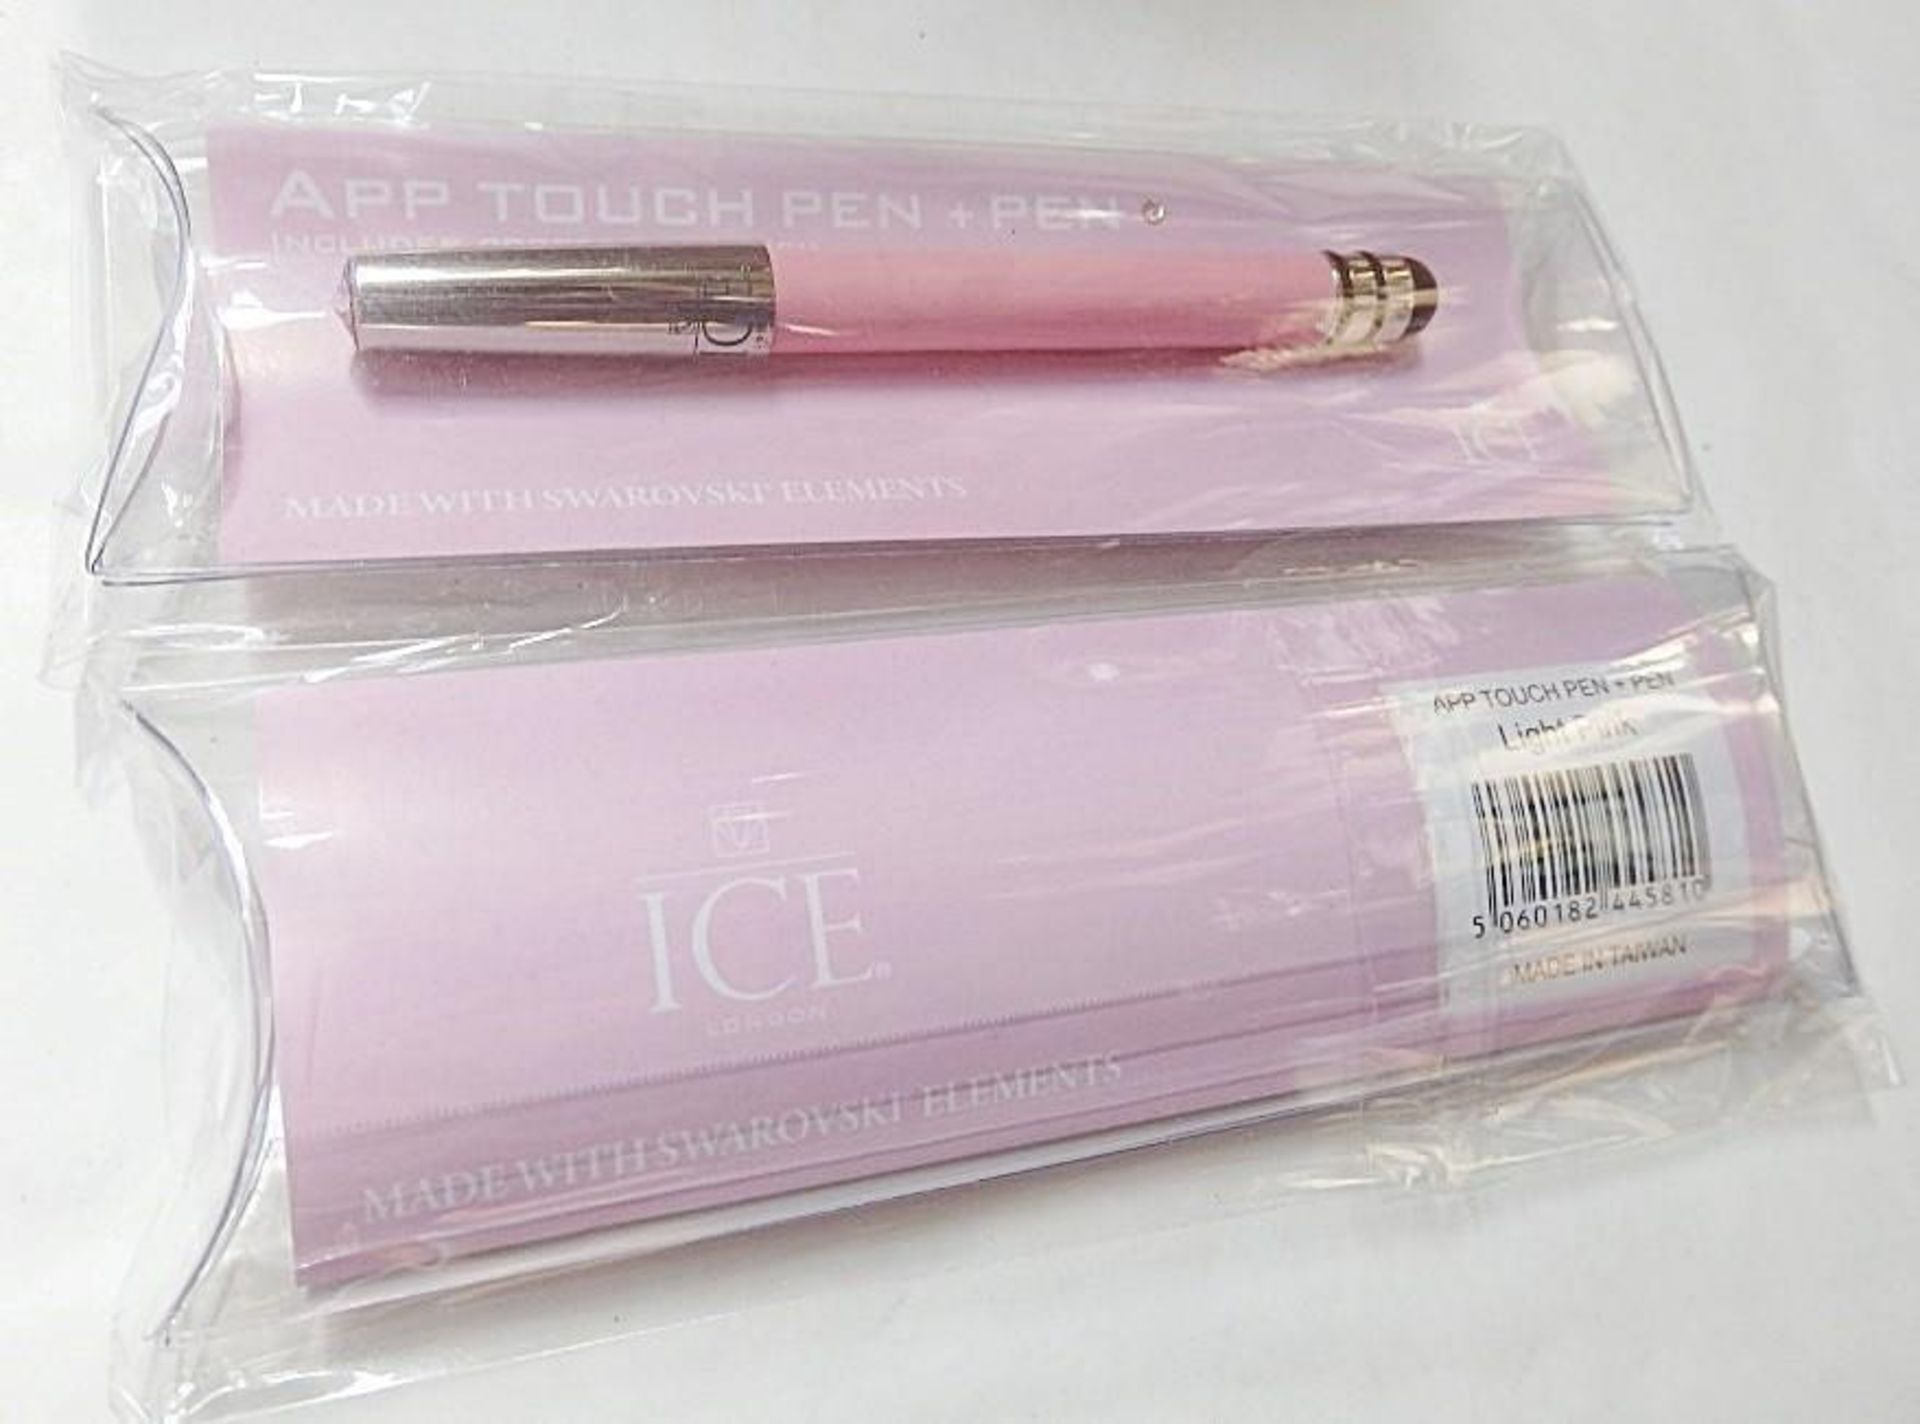 10 x ICE LONDON App Pen Duo - Touch Stylus And Ink Pen Combined - Colour: LIGHT PINK - MADE WITH - Image 2 of 5